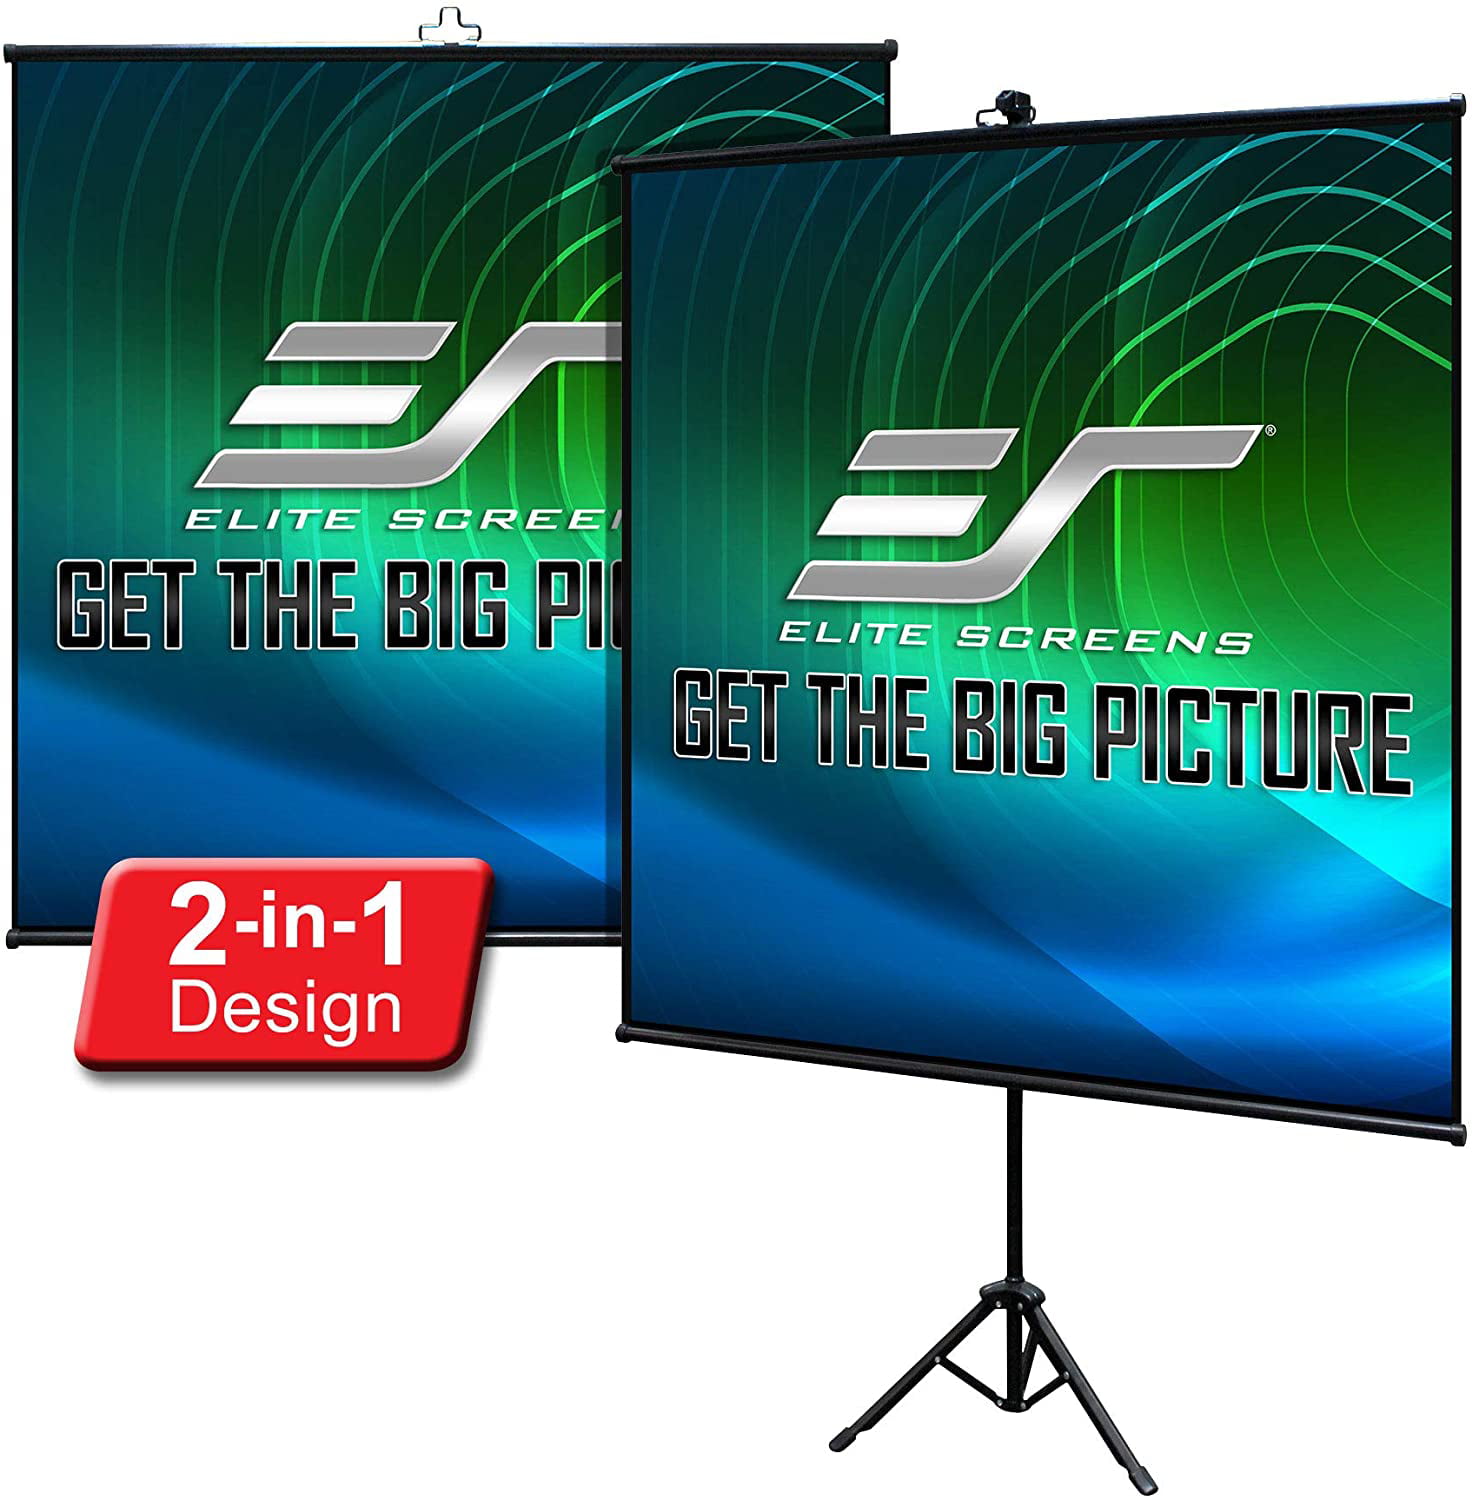 2 in 1 Portable Projector Screen Dual Tripod Stand/Wall Mount Indoor/Outdoor 50-INCH Black T50SW 1:1 w/Carrying Bag Elite Screens Tripod Lite Wall Series 